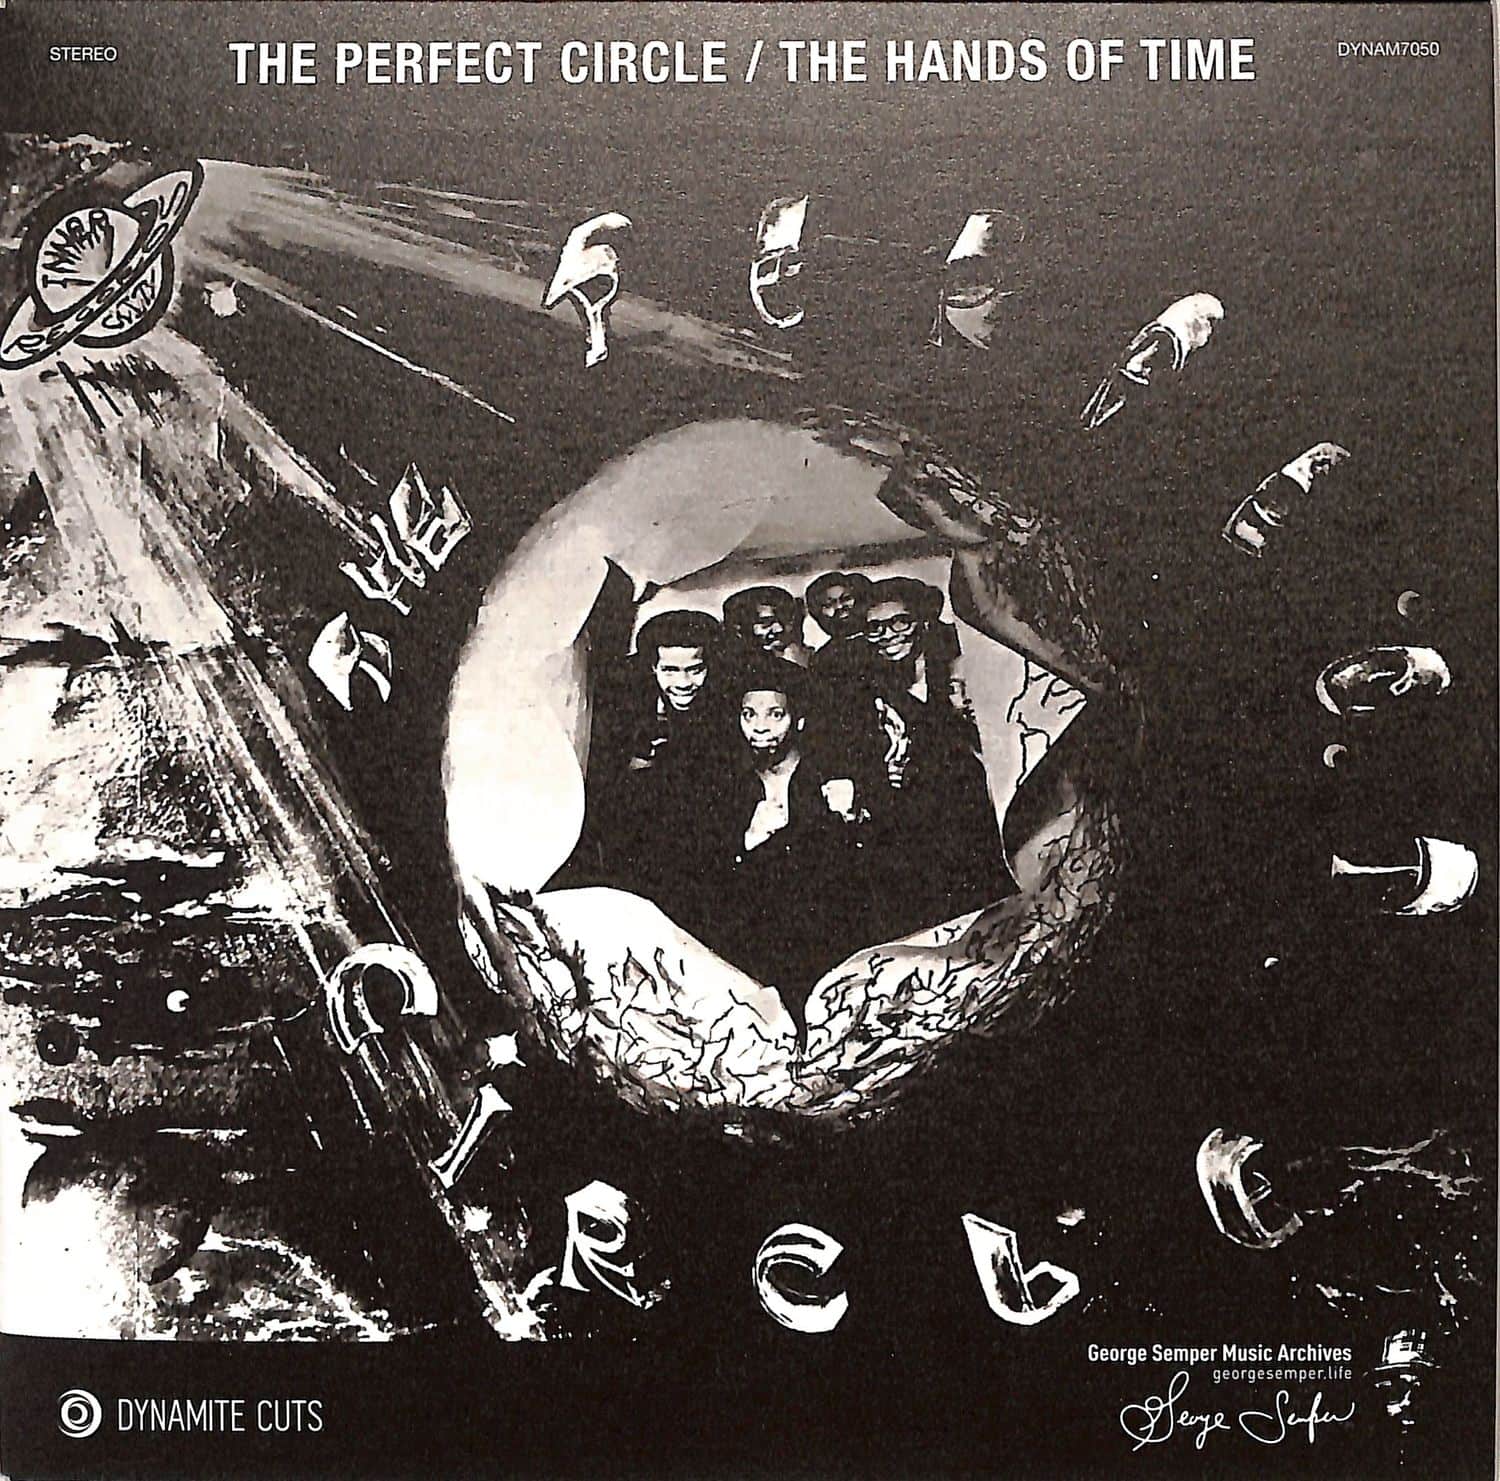 The Perfect Circle - THE PERFECT CIRCLE / THE HANDS OF TIME 